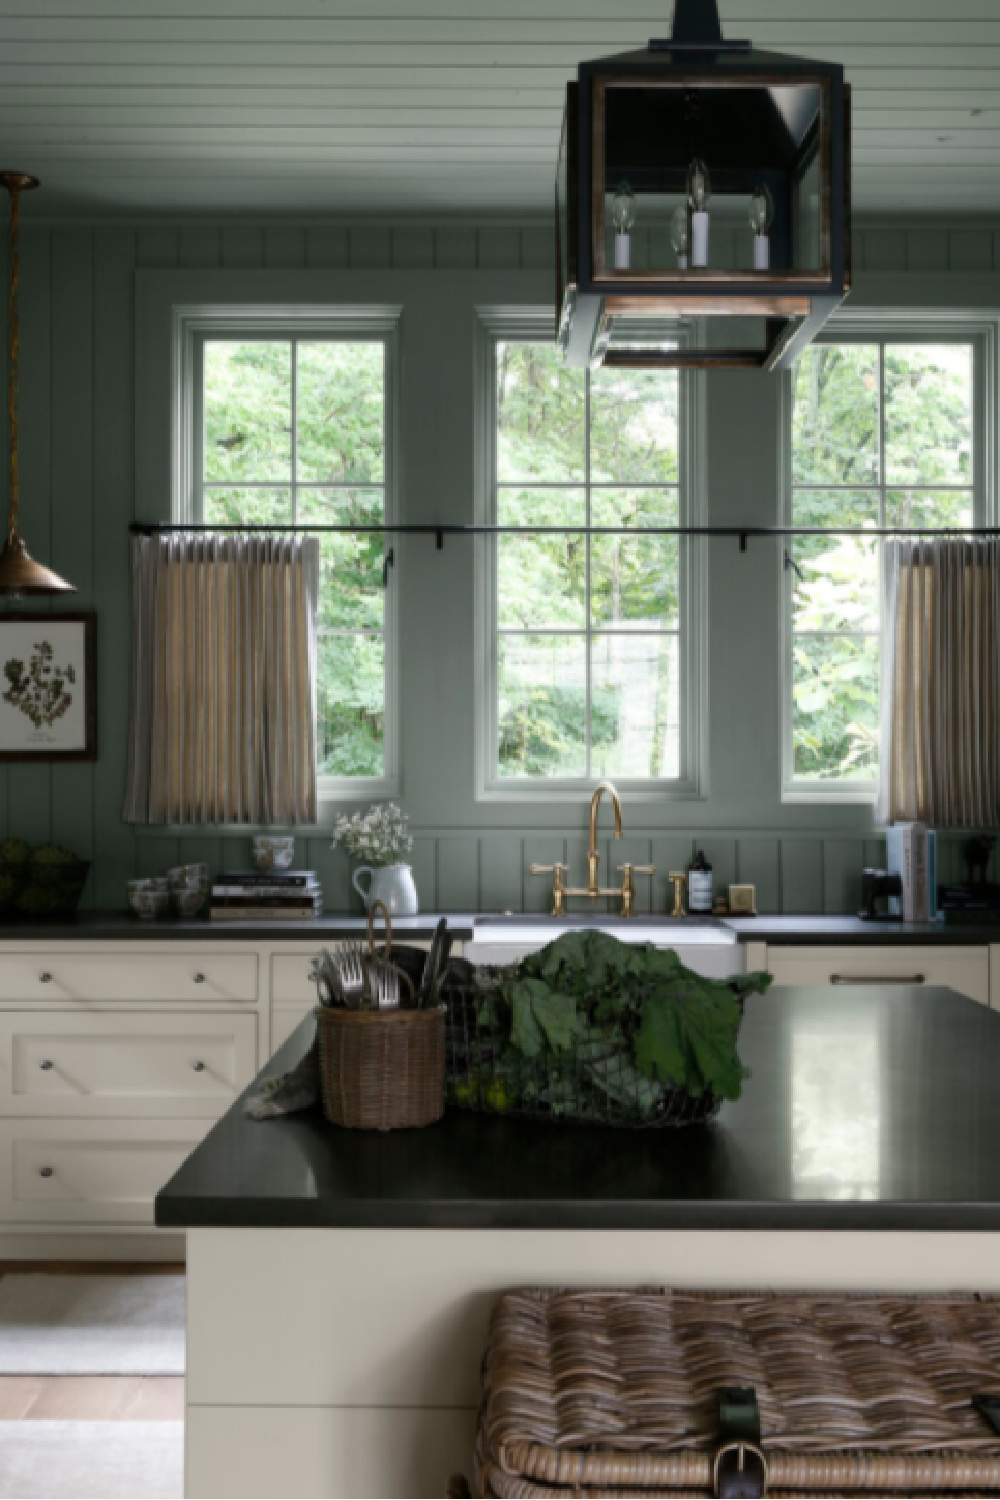 April Tomlin designed kitchen (Southern Charm) with SW Acacia Haze green paint color. #acaciahaze #greenkitchens